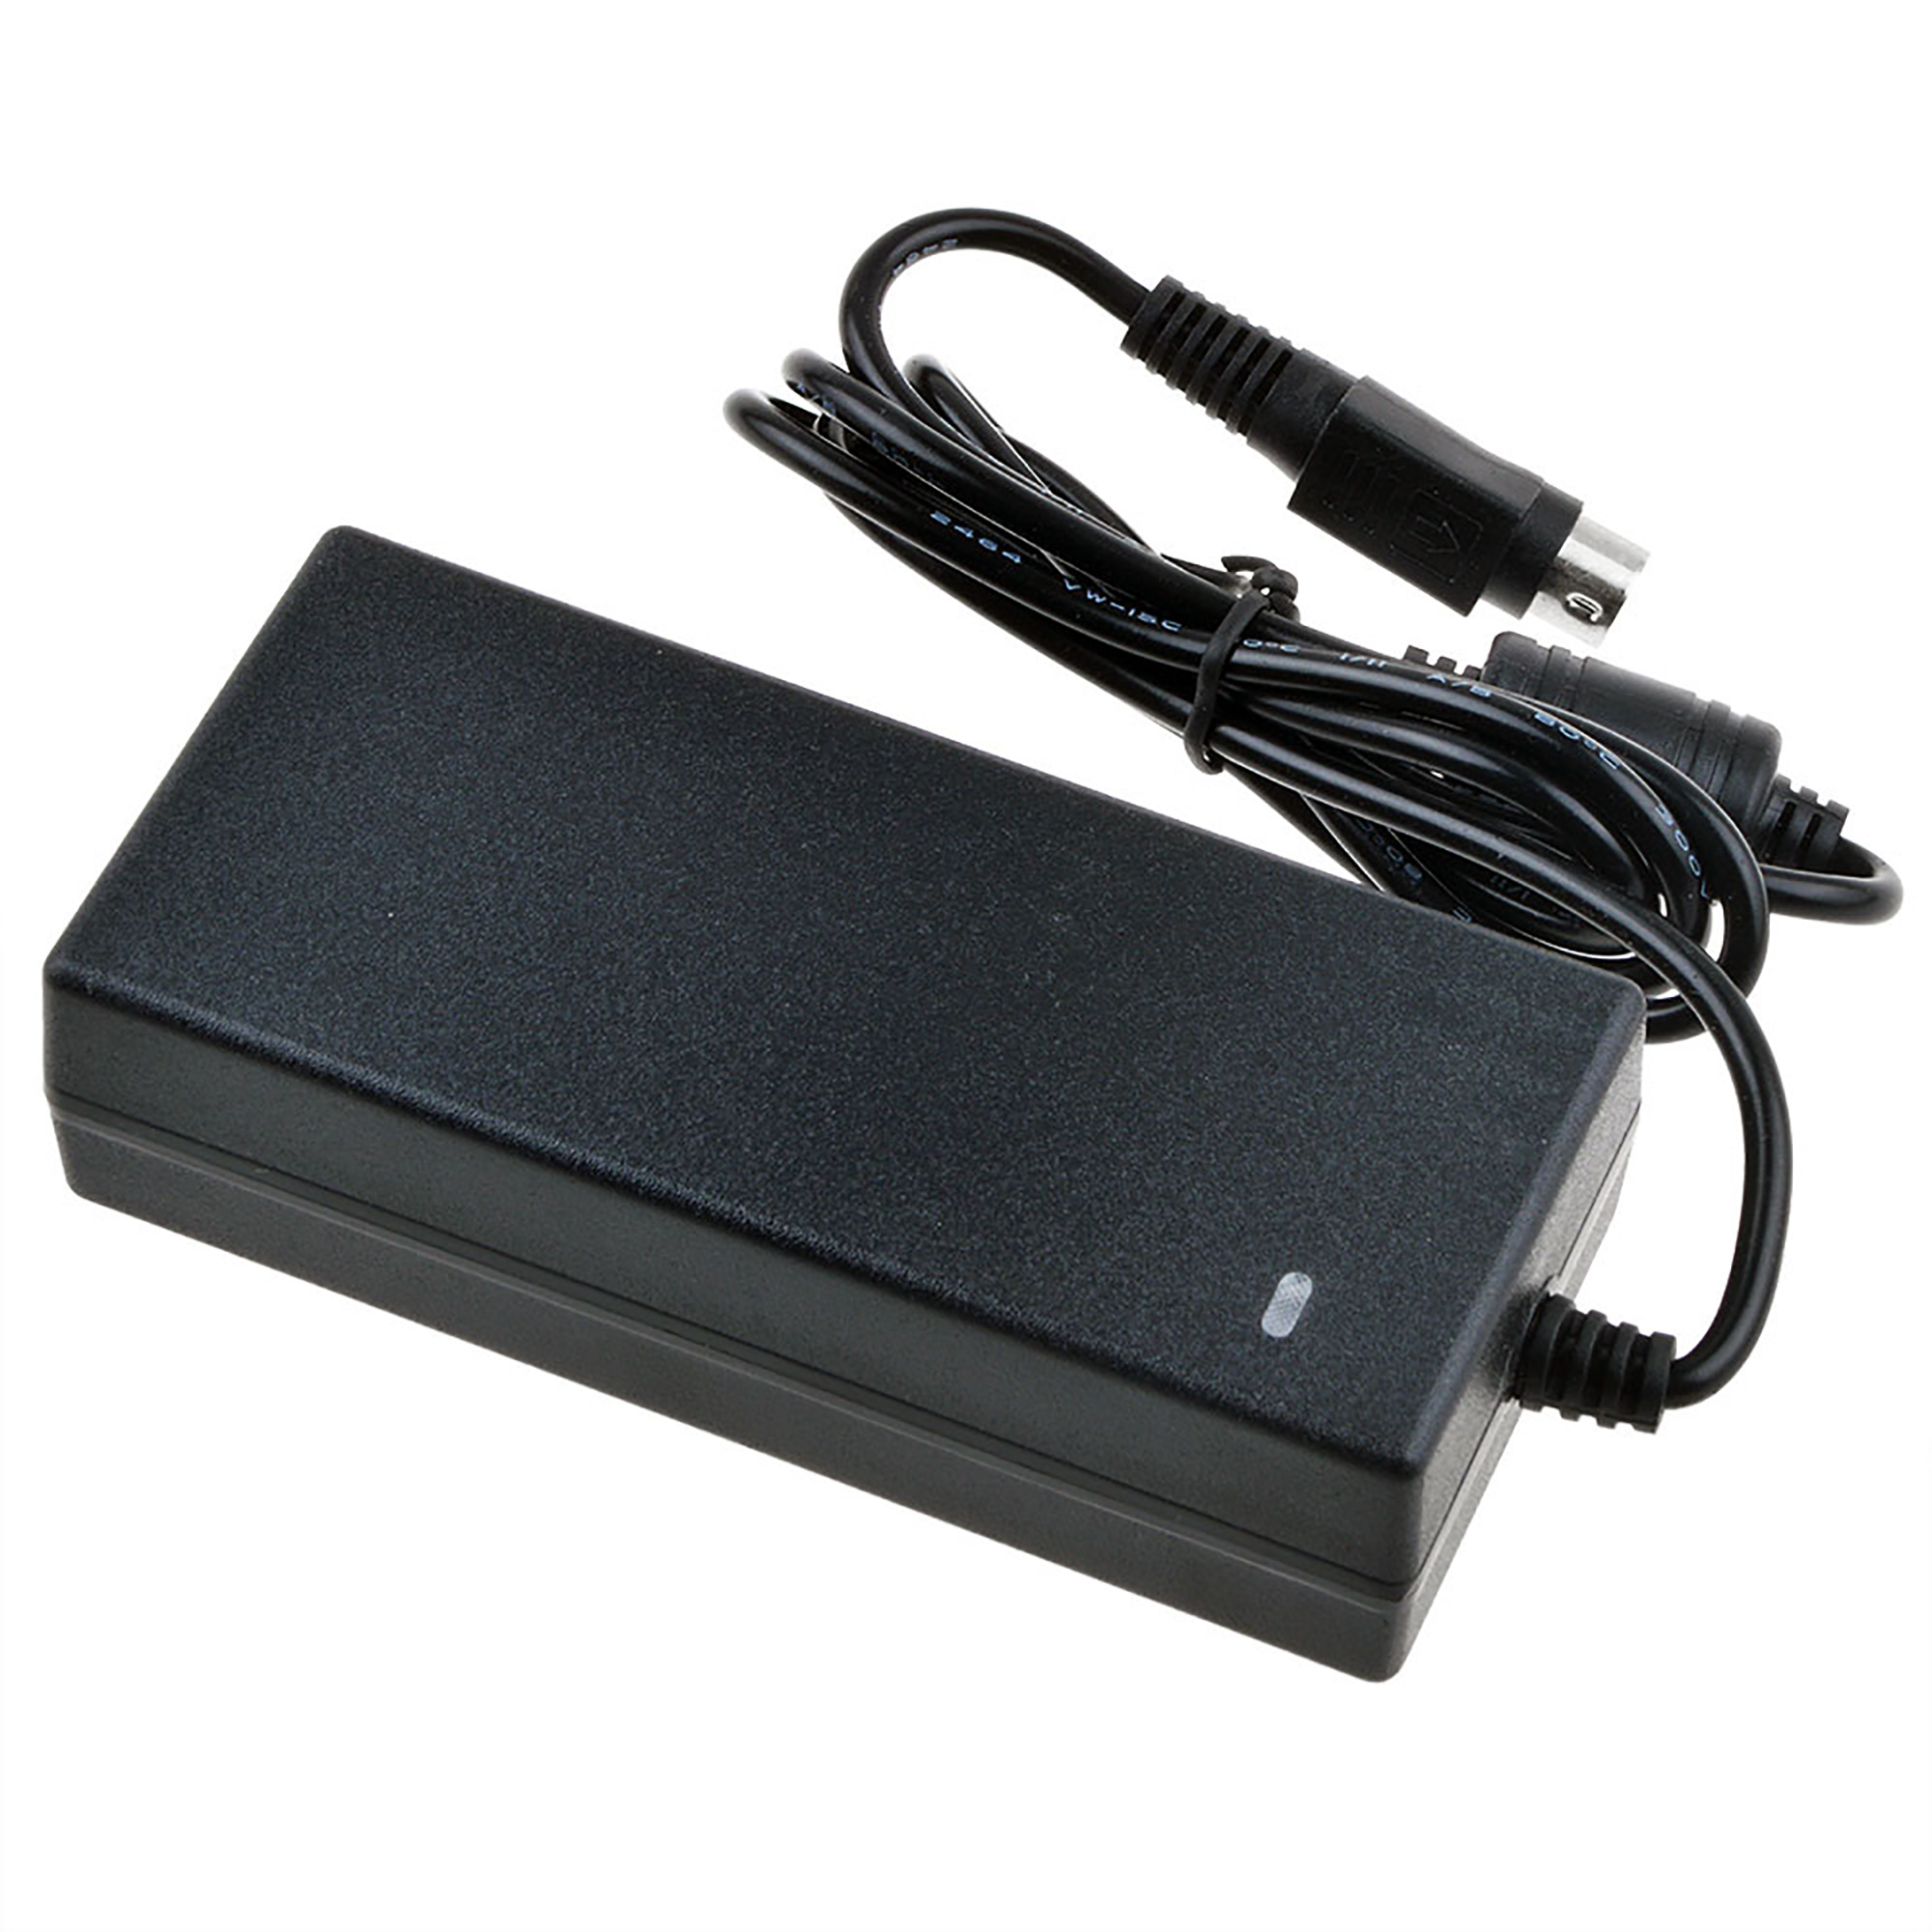 PKPOWER 4-Pin AC DC Adapter For StarTech SATDOCK4U3E SATDOCK4U3RE SDOCK4U33 S3540BU33E SAT35401U 4 Bay eSATA USB 3.0 to SATA HD Docking Station Hard Disk Drive Enclosure HDD Star Tech Power Supply - image 2 of 5